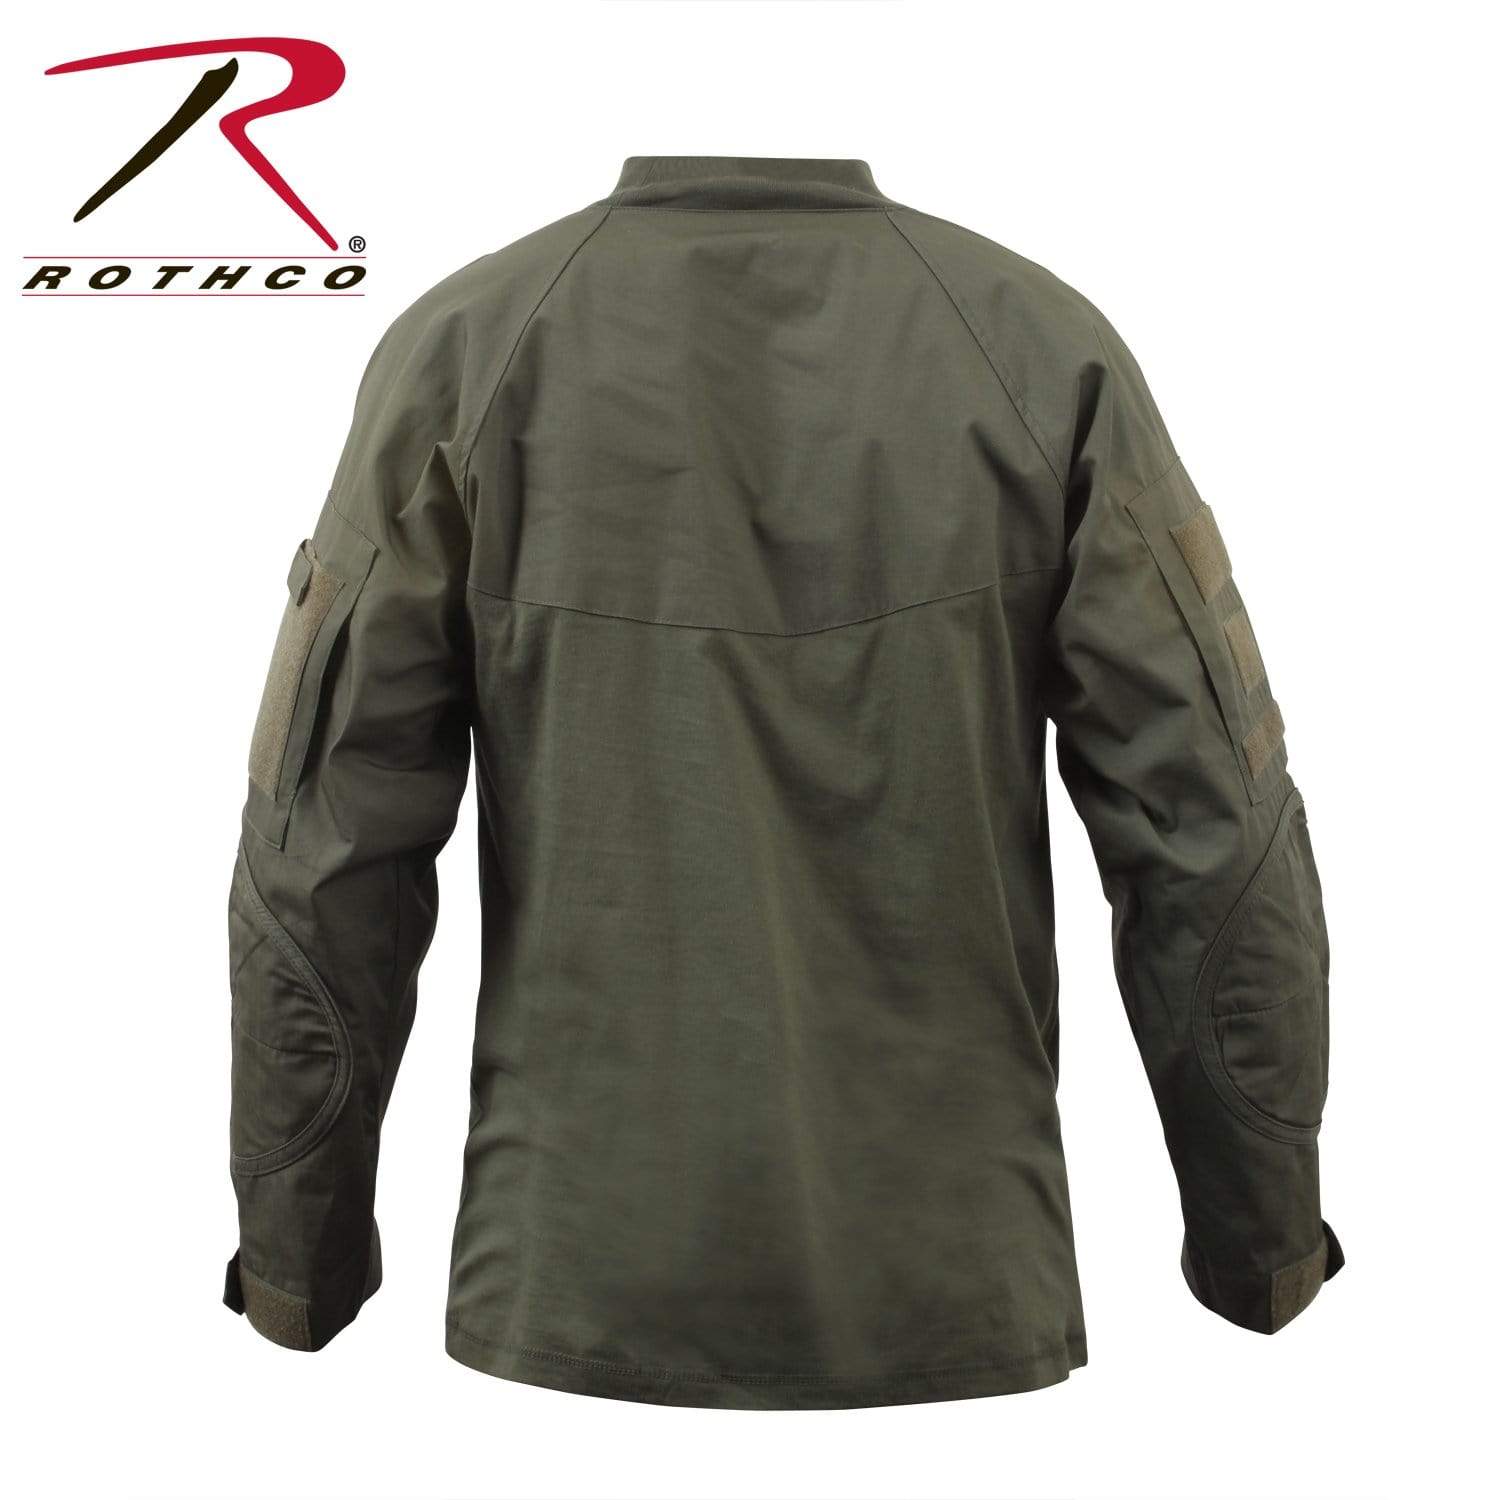 Rothco Military Combat Shirt- Olive Drab - Eminent Paintball And Airsoft